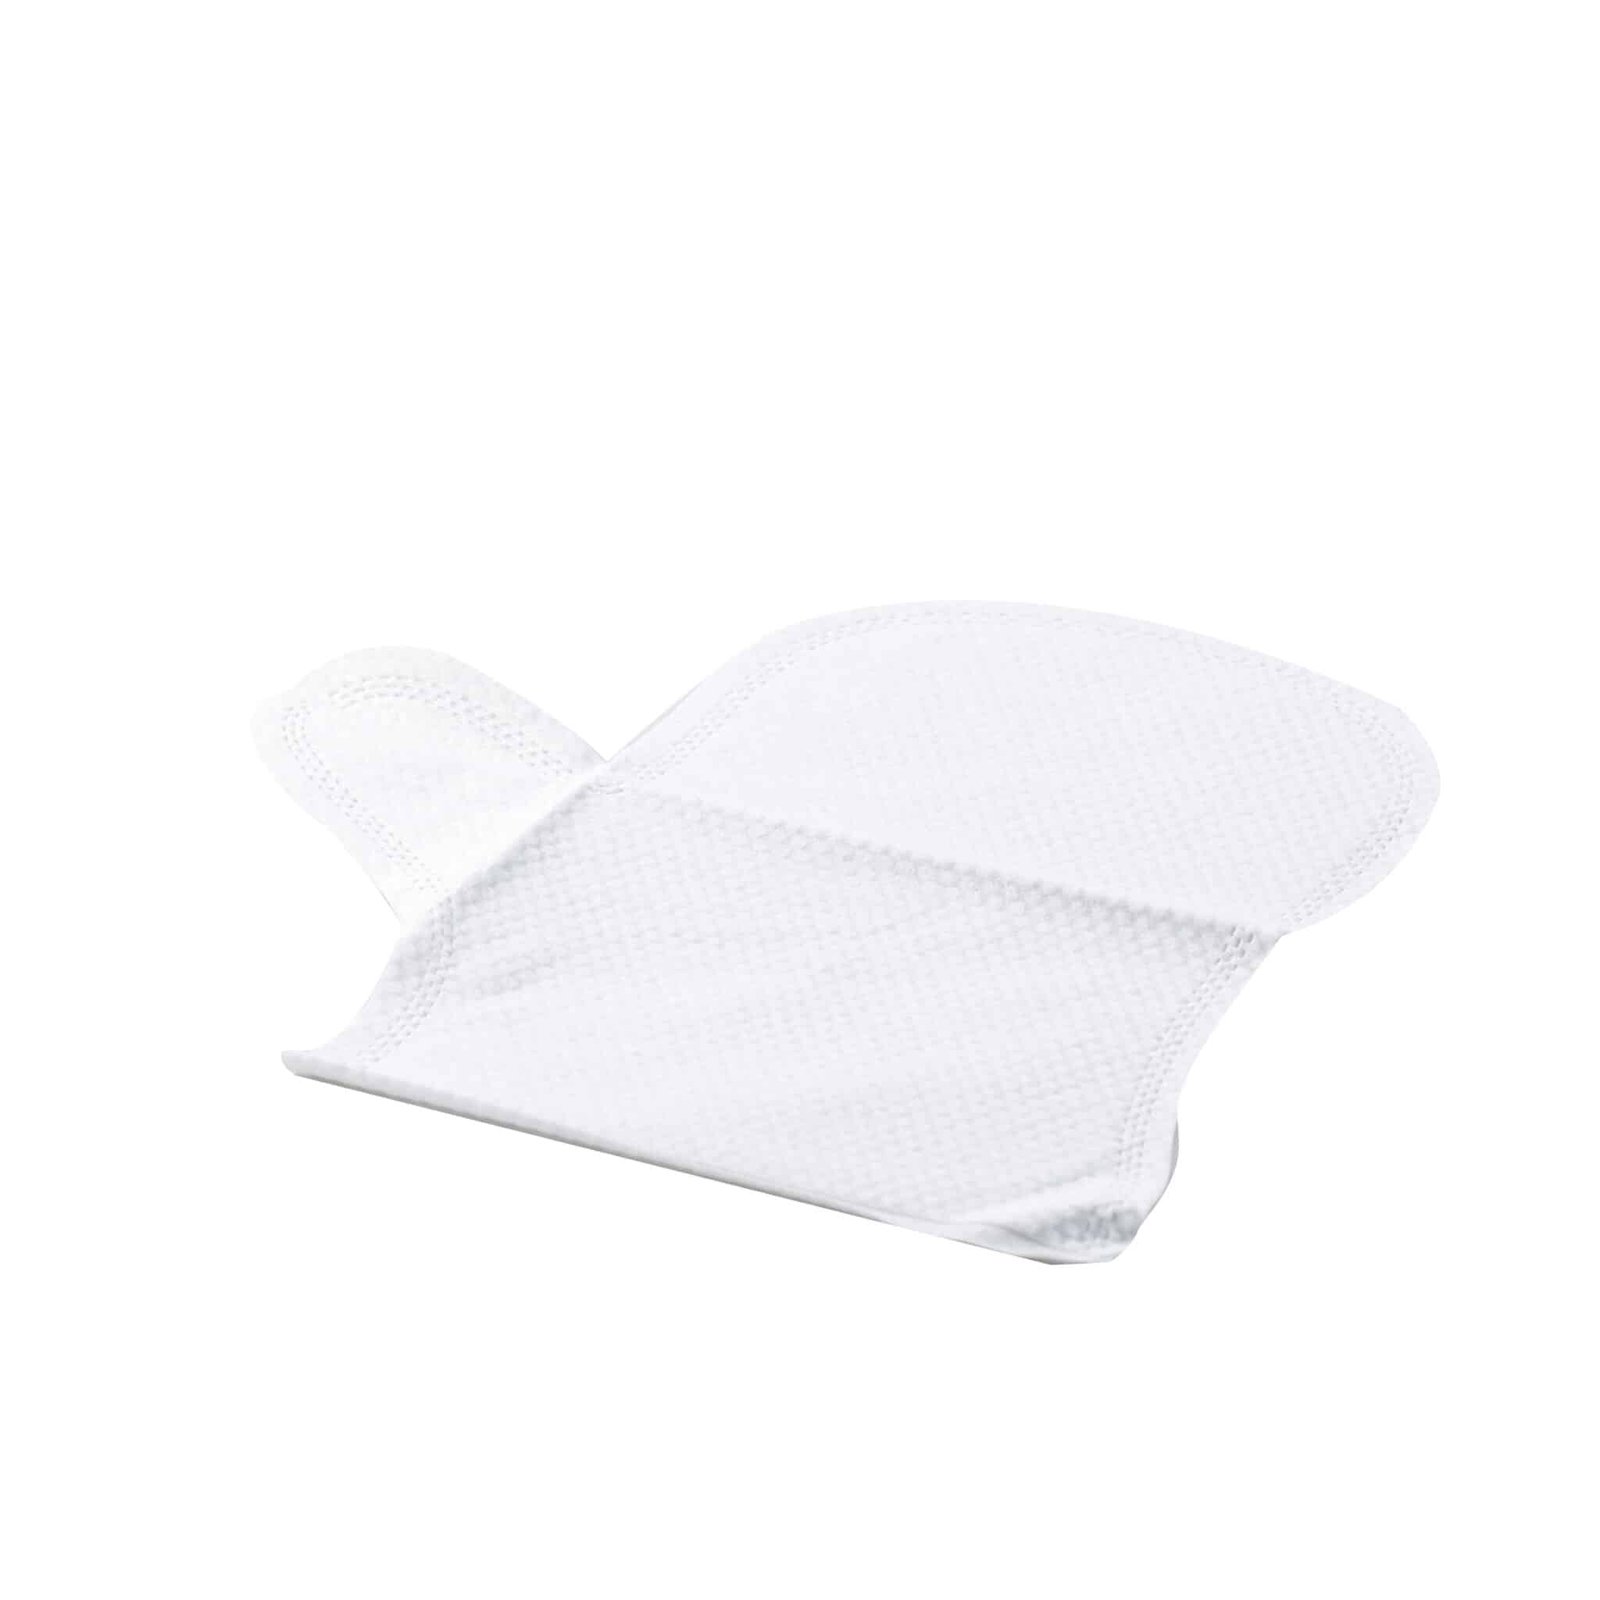 2-Layer Waterproof-Absorbent Pad - Soft, Skin-Friendly, Easy to Carry & Use